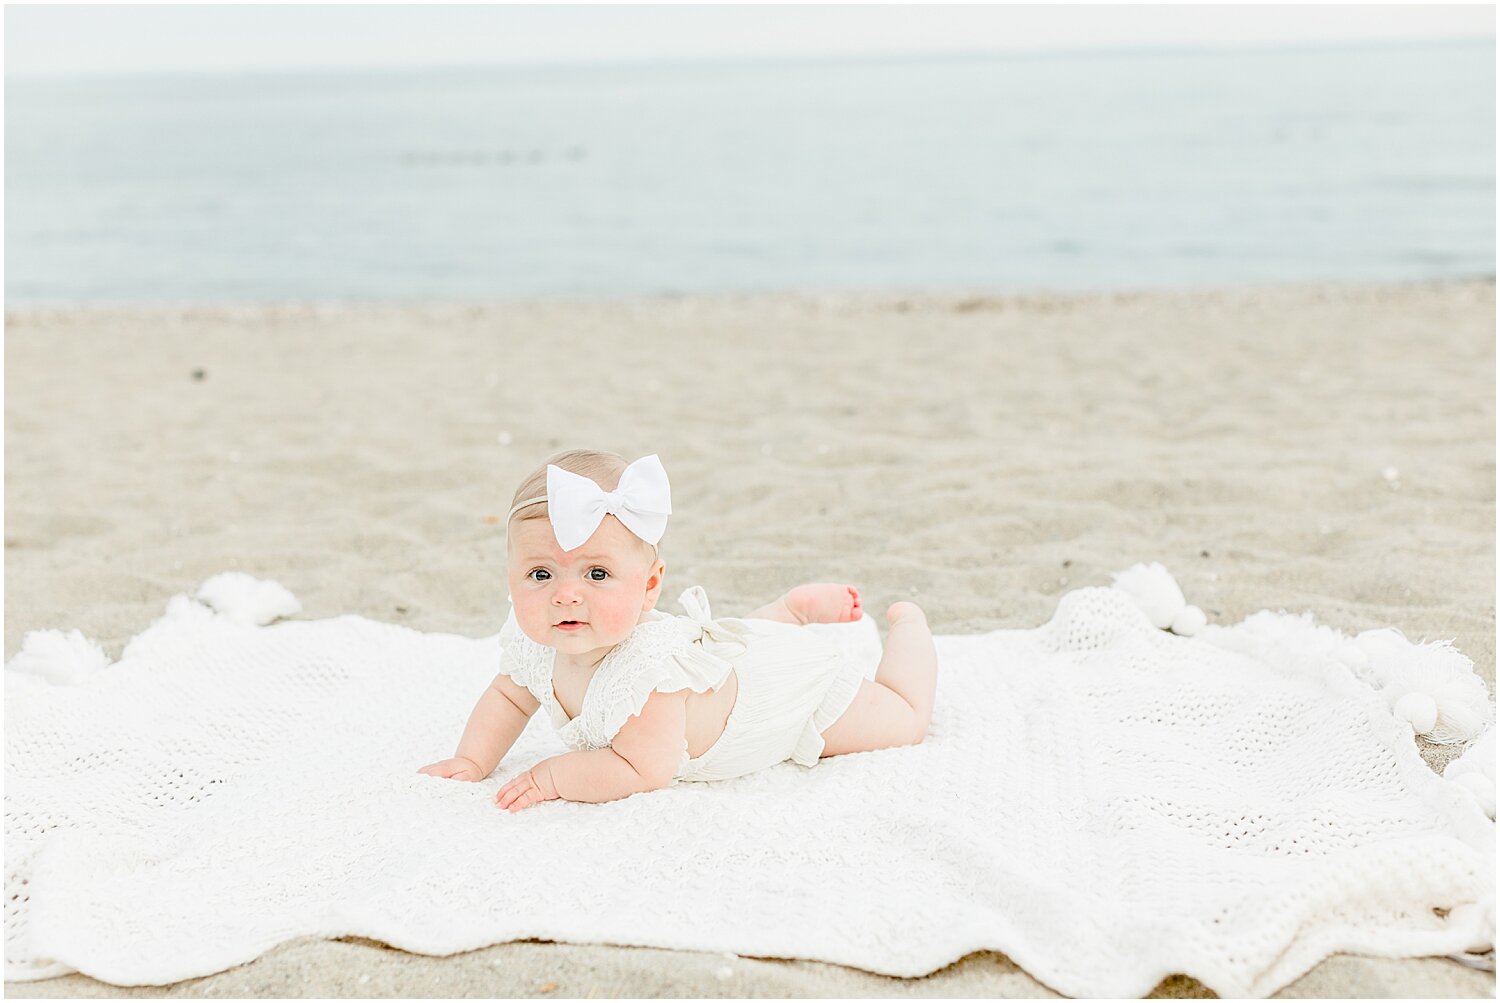 6 month milestone session on the beach with Westport, CT Photographer, Kristin Wood Photography.